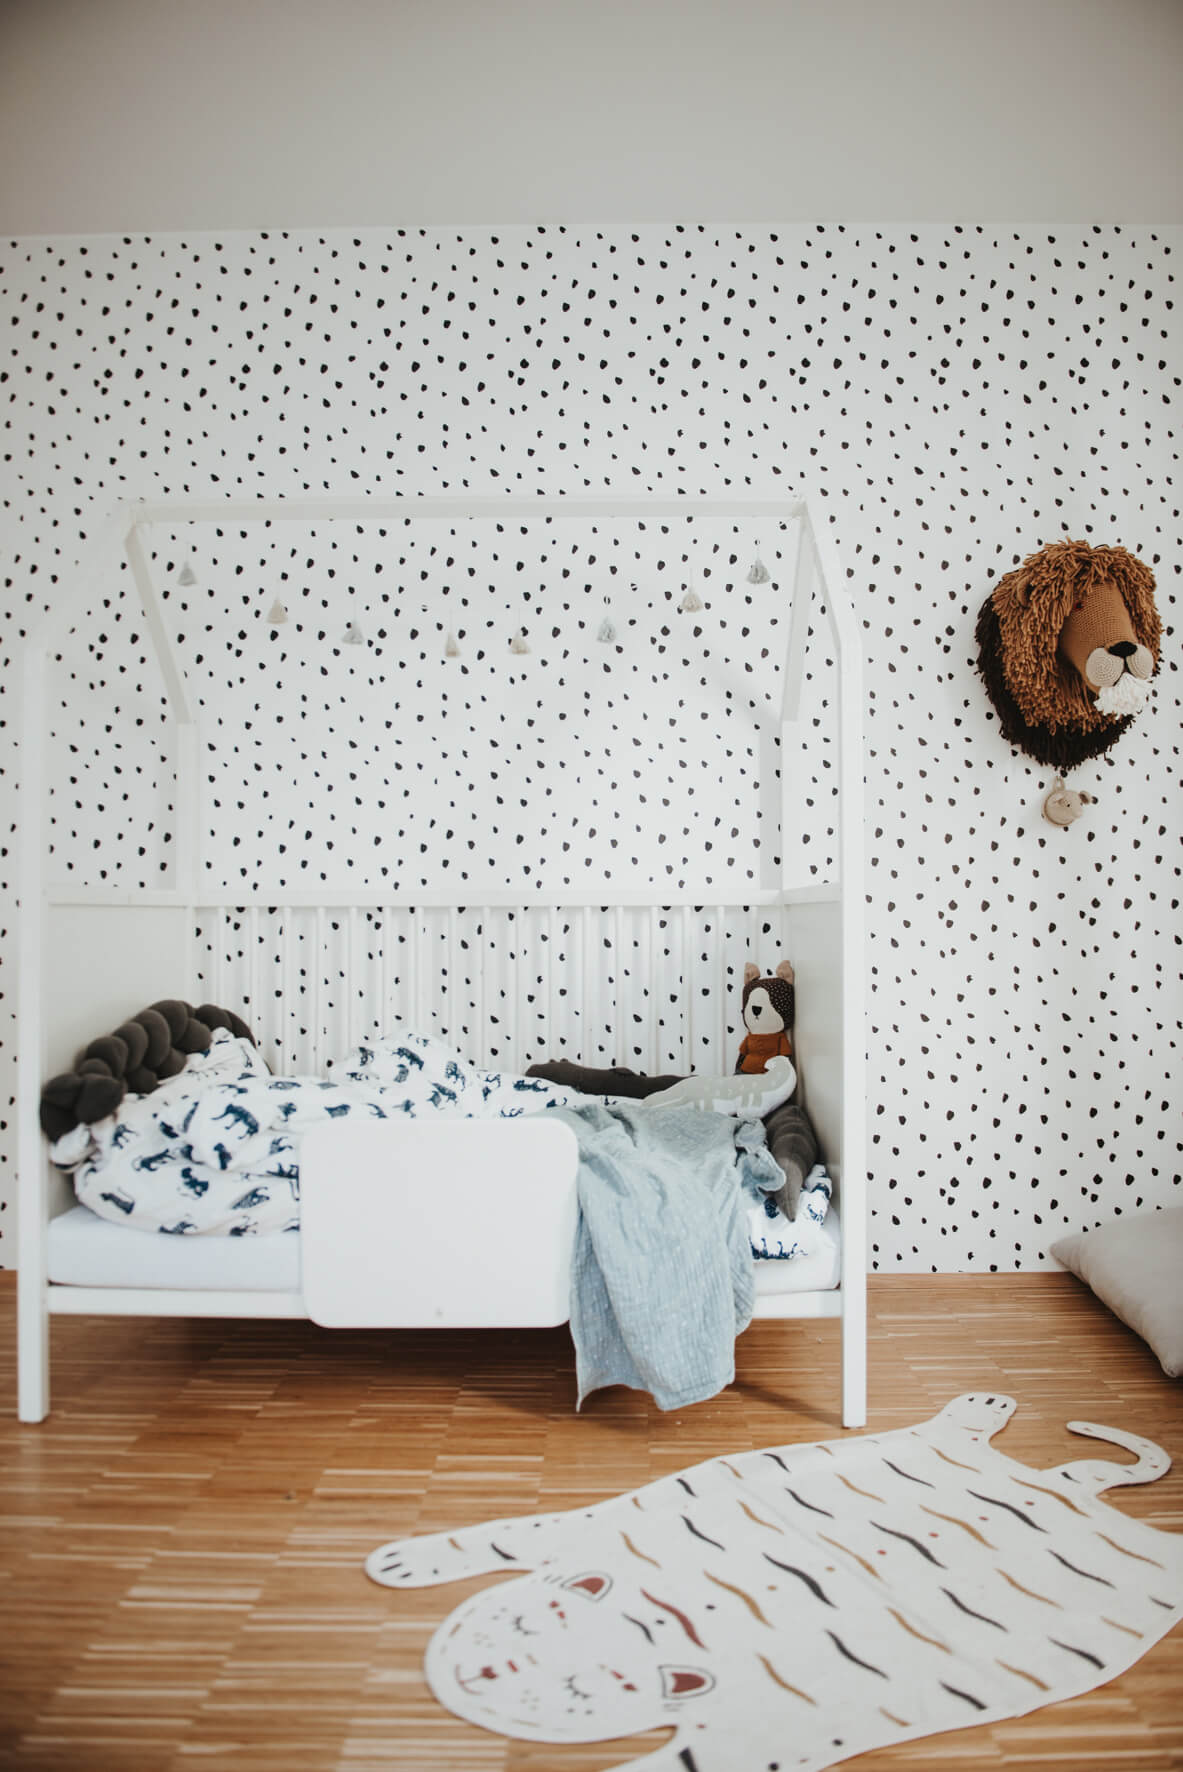 Eclectic dots removable wallpaper in minimal boys room interior